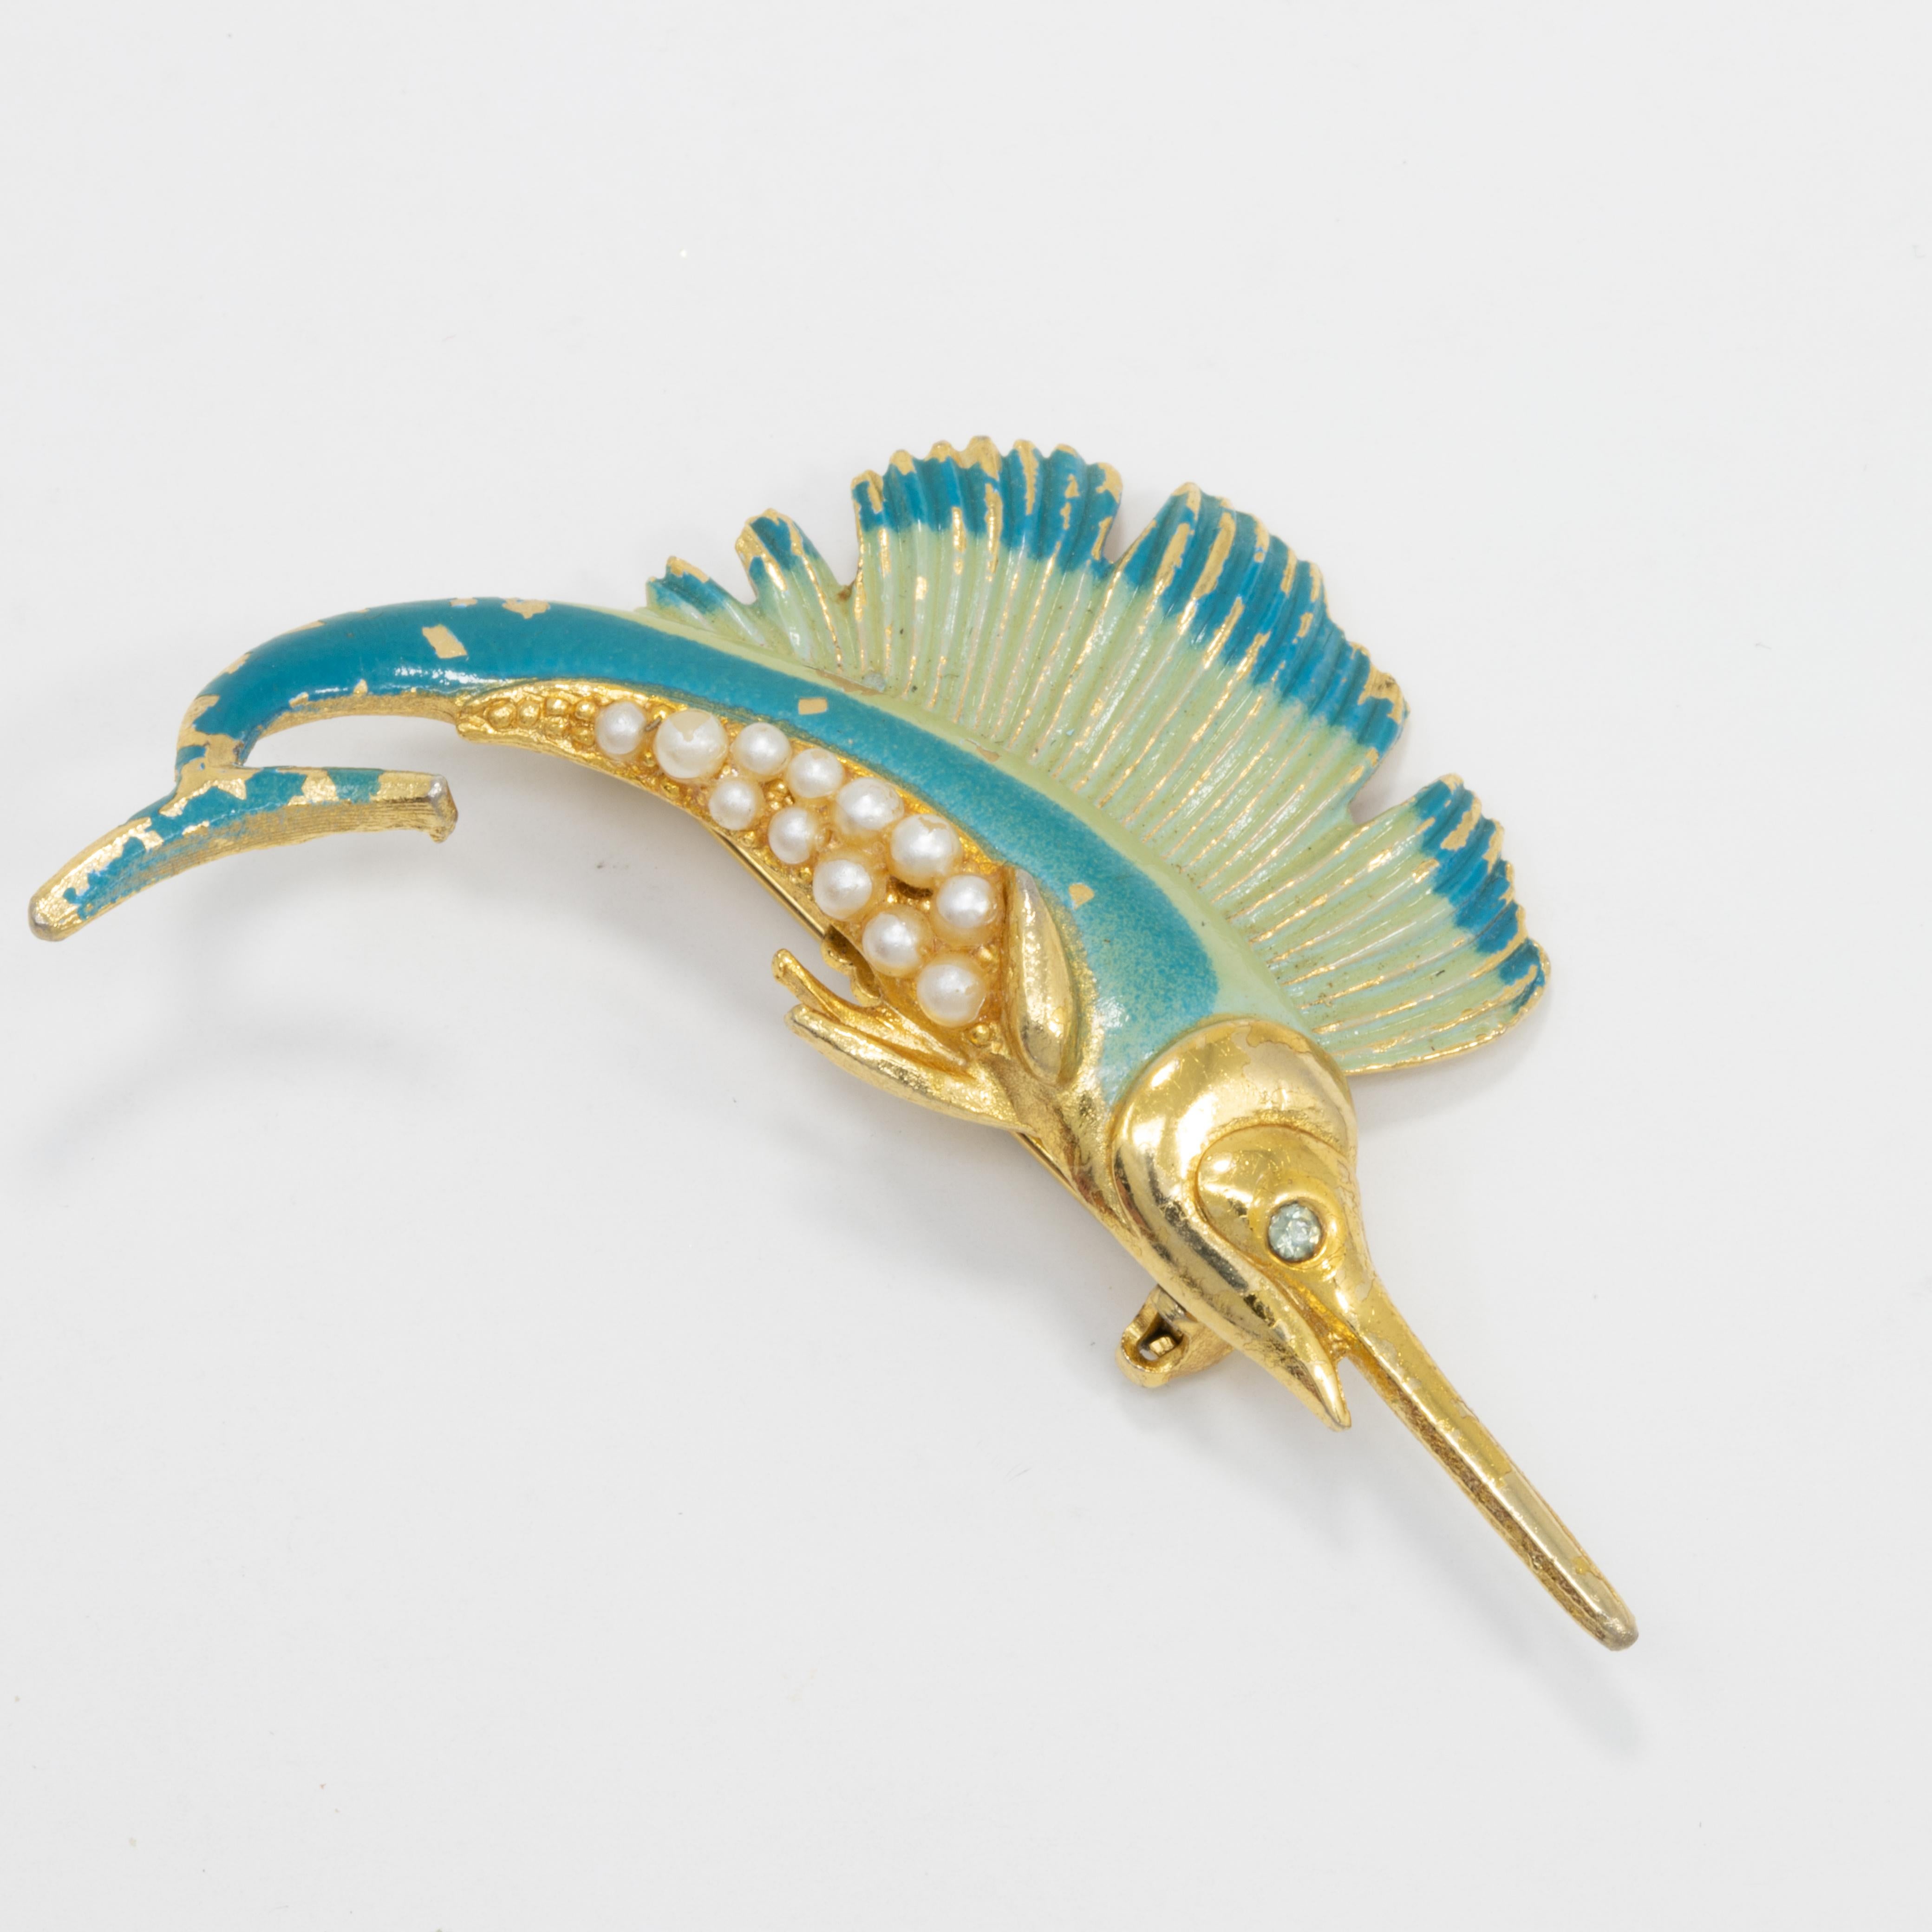 A vintage nautical pin. This gold-plated sailfish is painted with green and teal enamel, and accented with faux pearls and crystals.